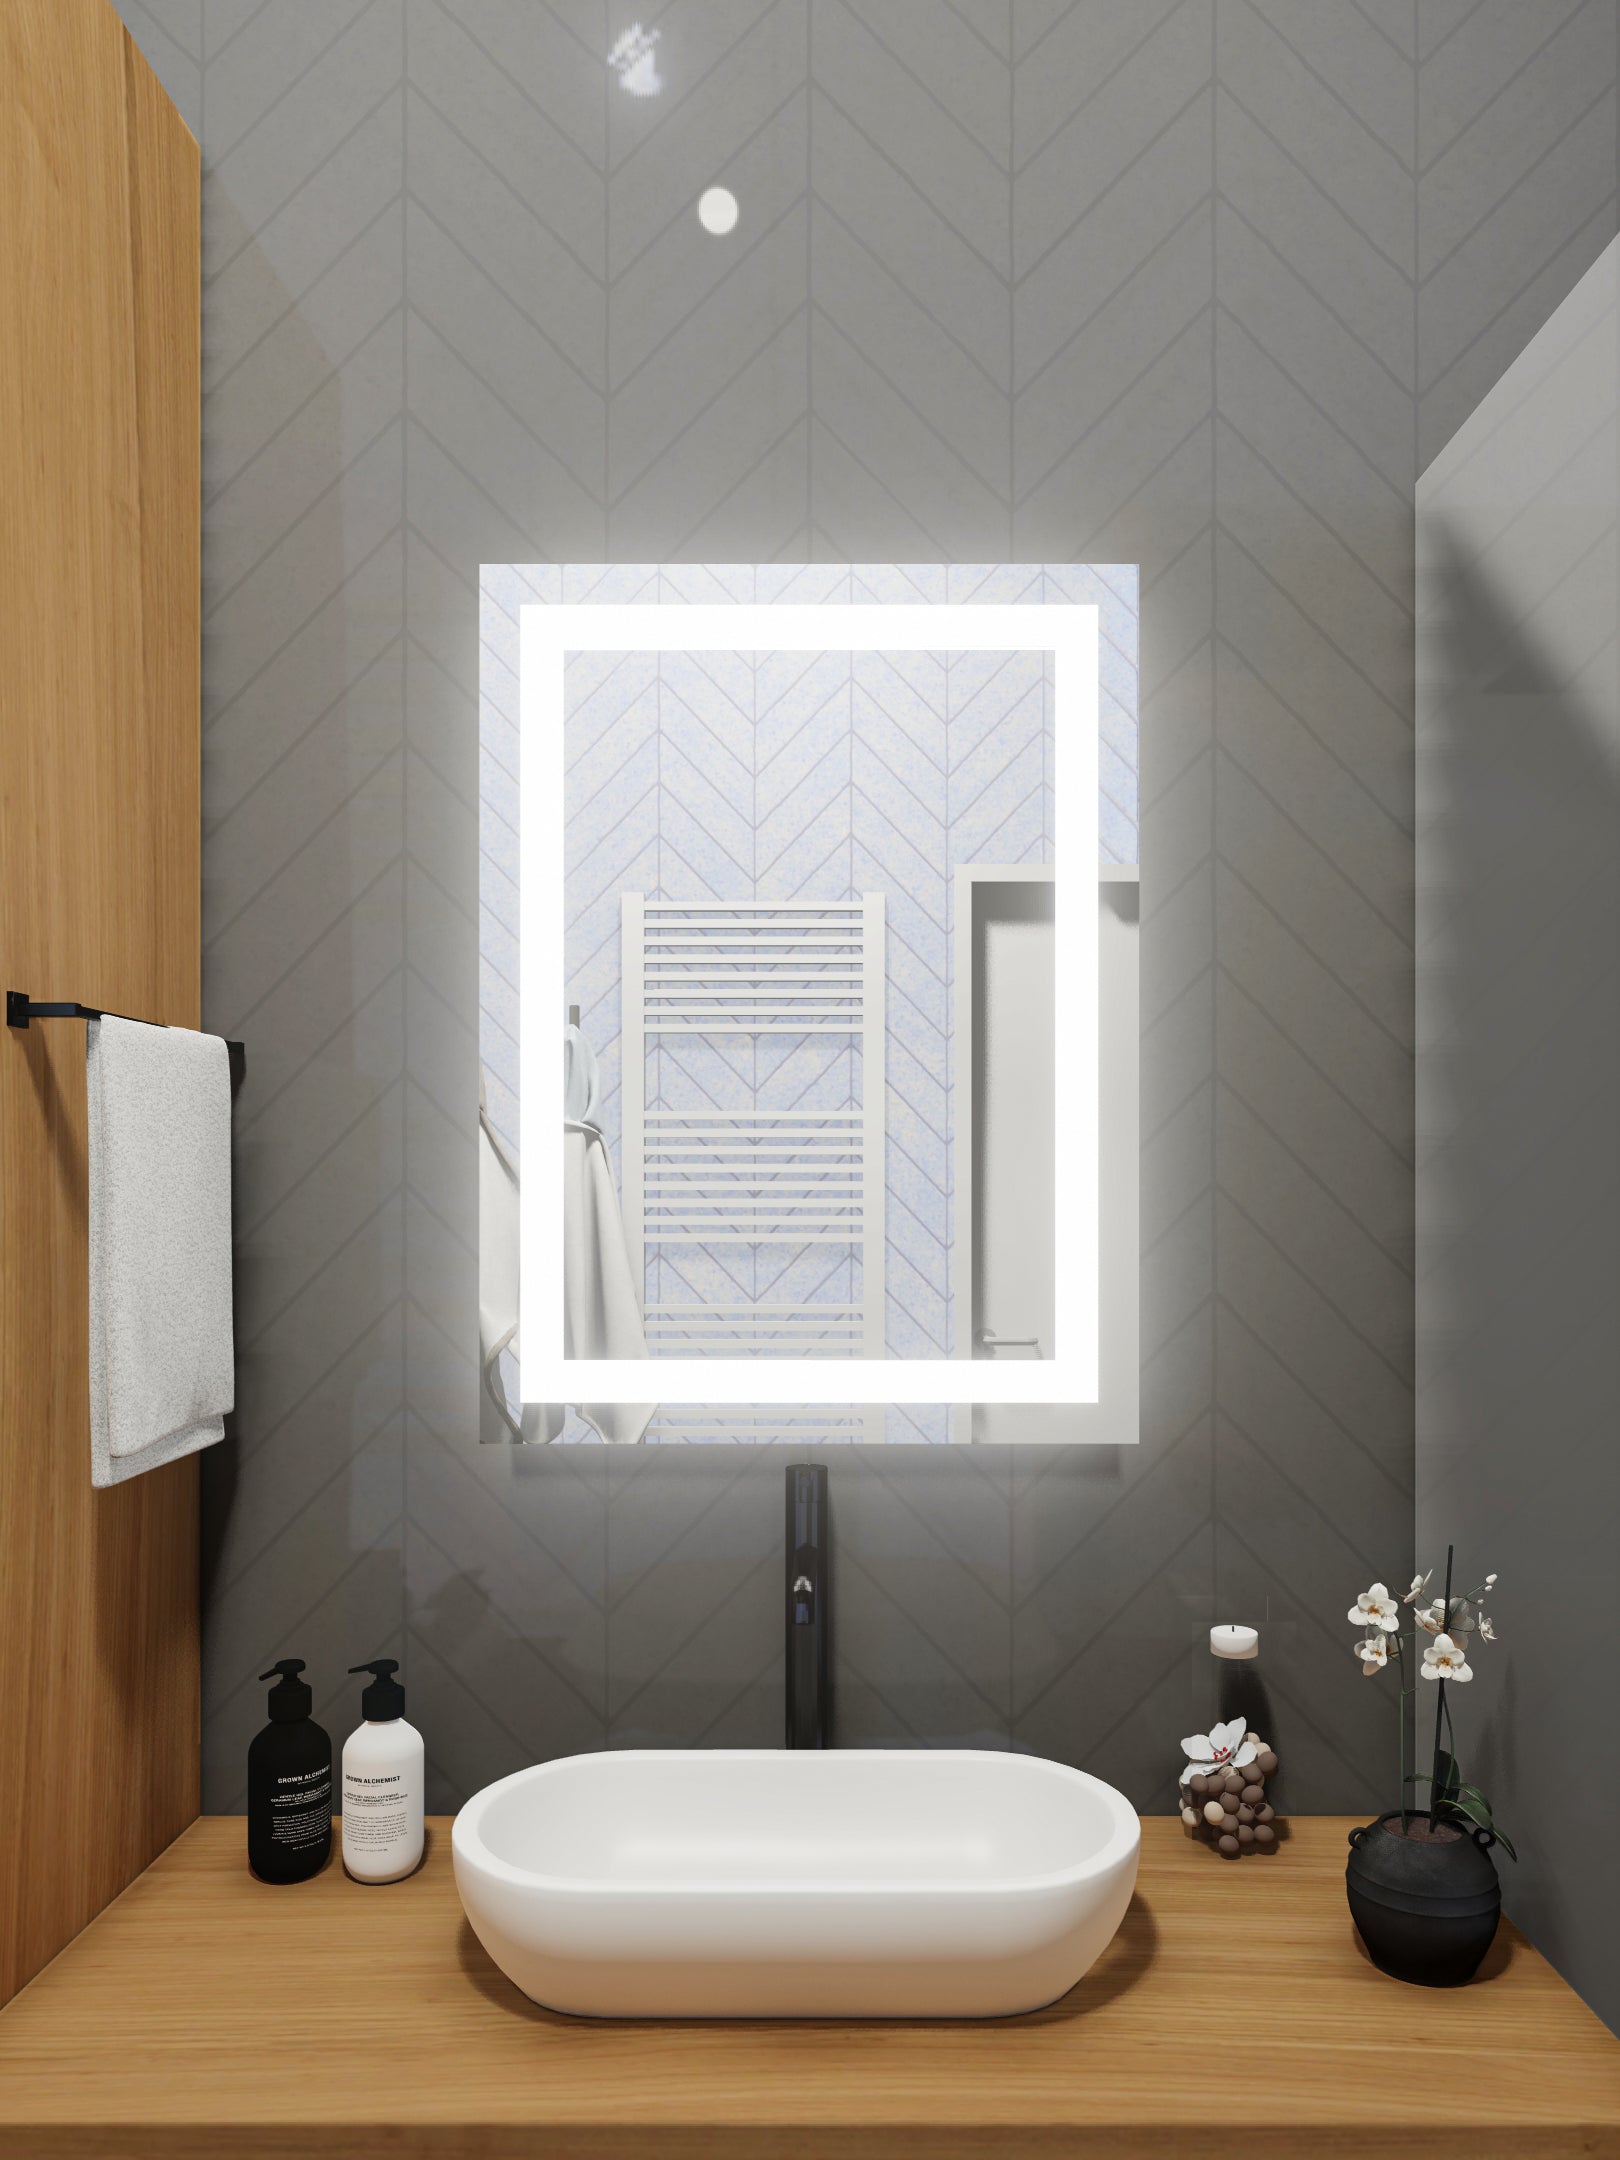 LED Mirror (Front-Lighted) 36" x 40" (or 40" x 36")